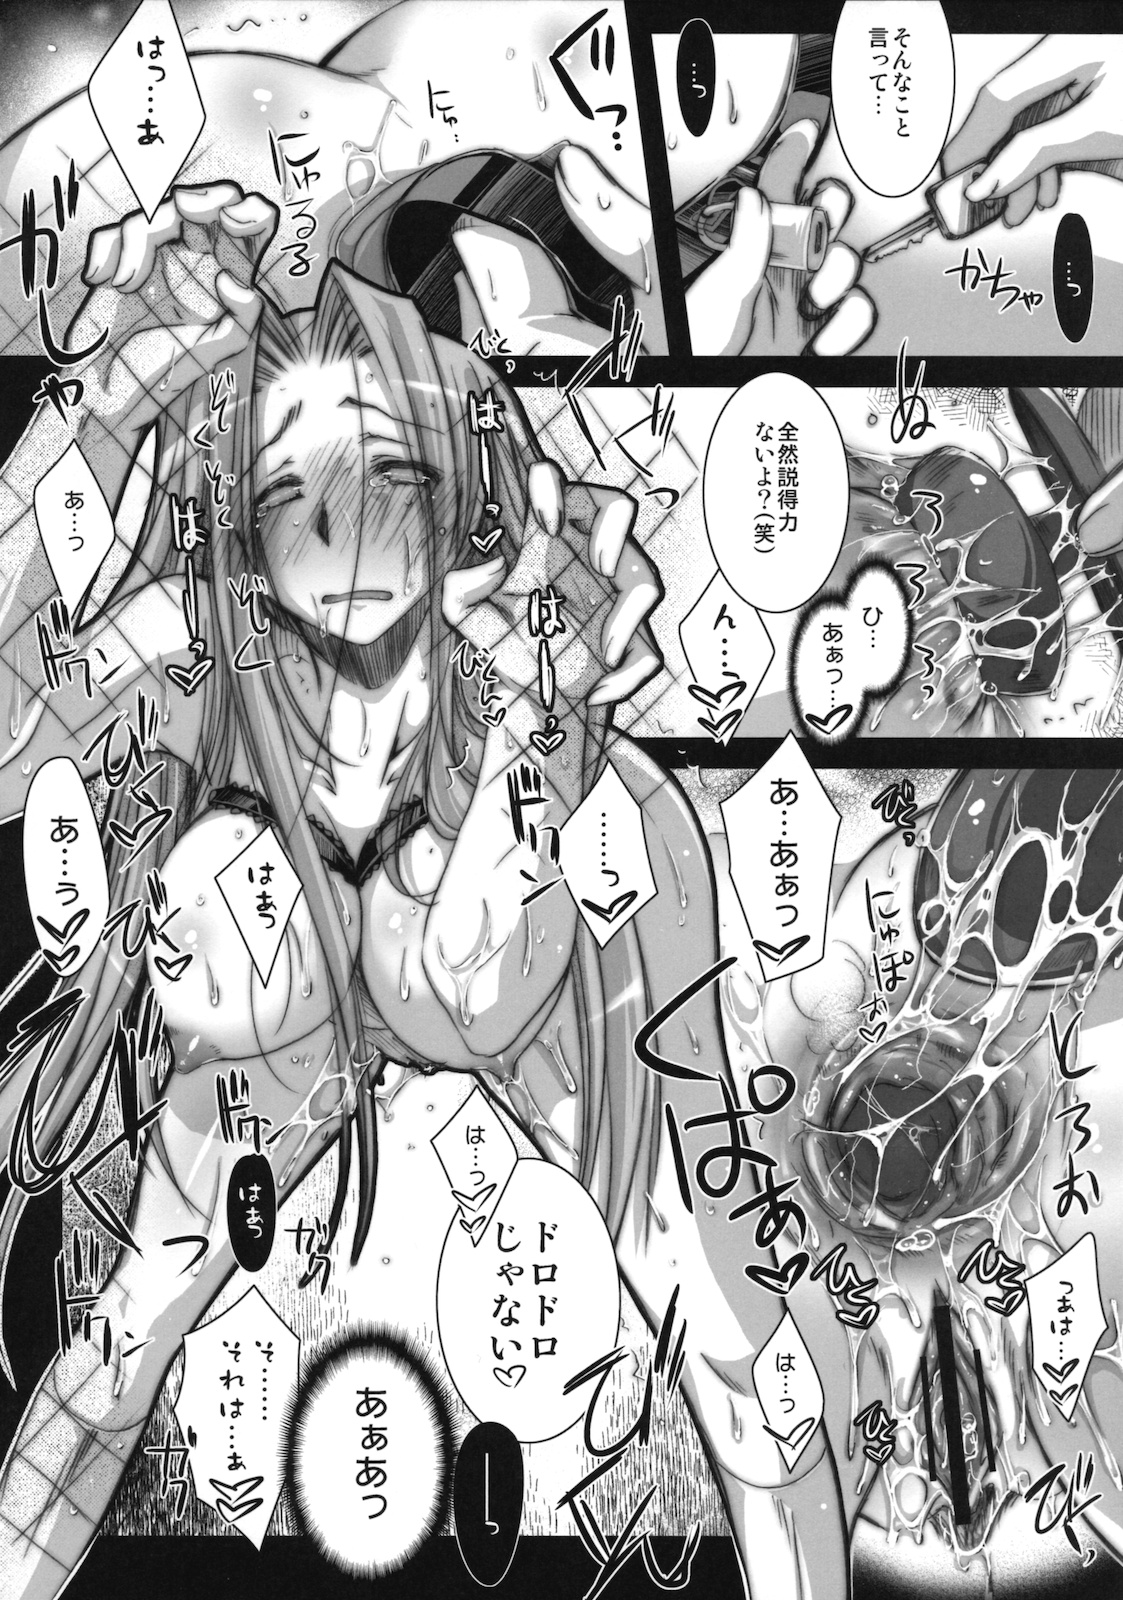 (COMIC1☆5) [Kaikinissyoku] R.O.D 7 -Rider or Die- (Fate/stay night) (COMIC1☆5) [怪奇日蝕] R・O・D 7 -Rider or Die- (Fate)